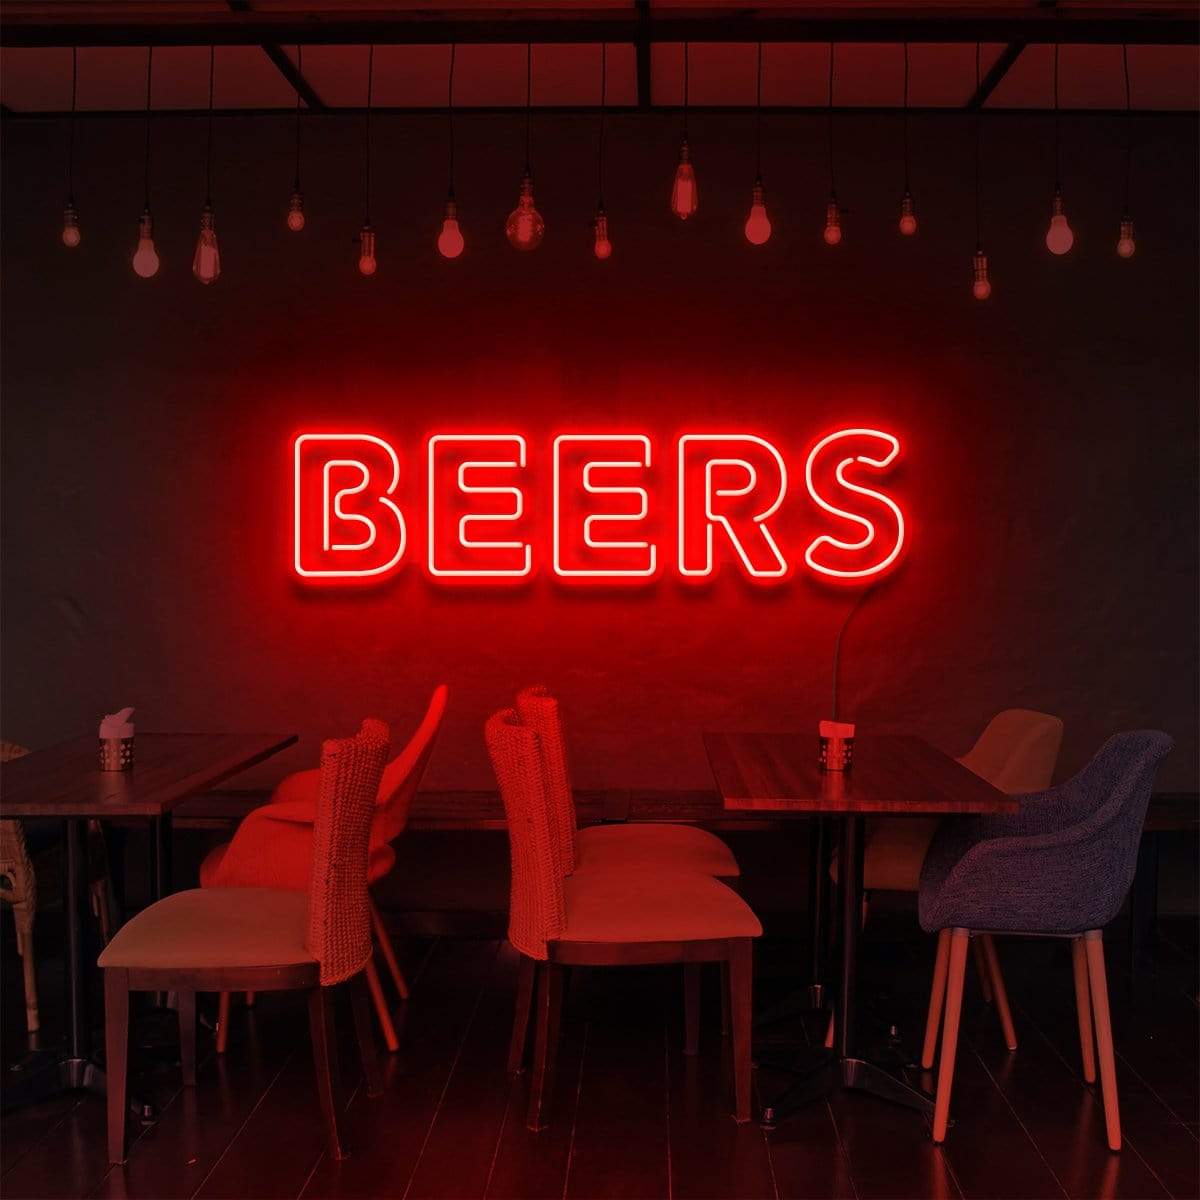 "Beers" Neon Sign for Bars & Restaurants 60cm (2ft) / Red / LED Neon by Neon Icons